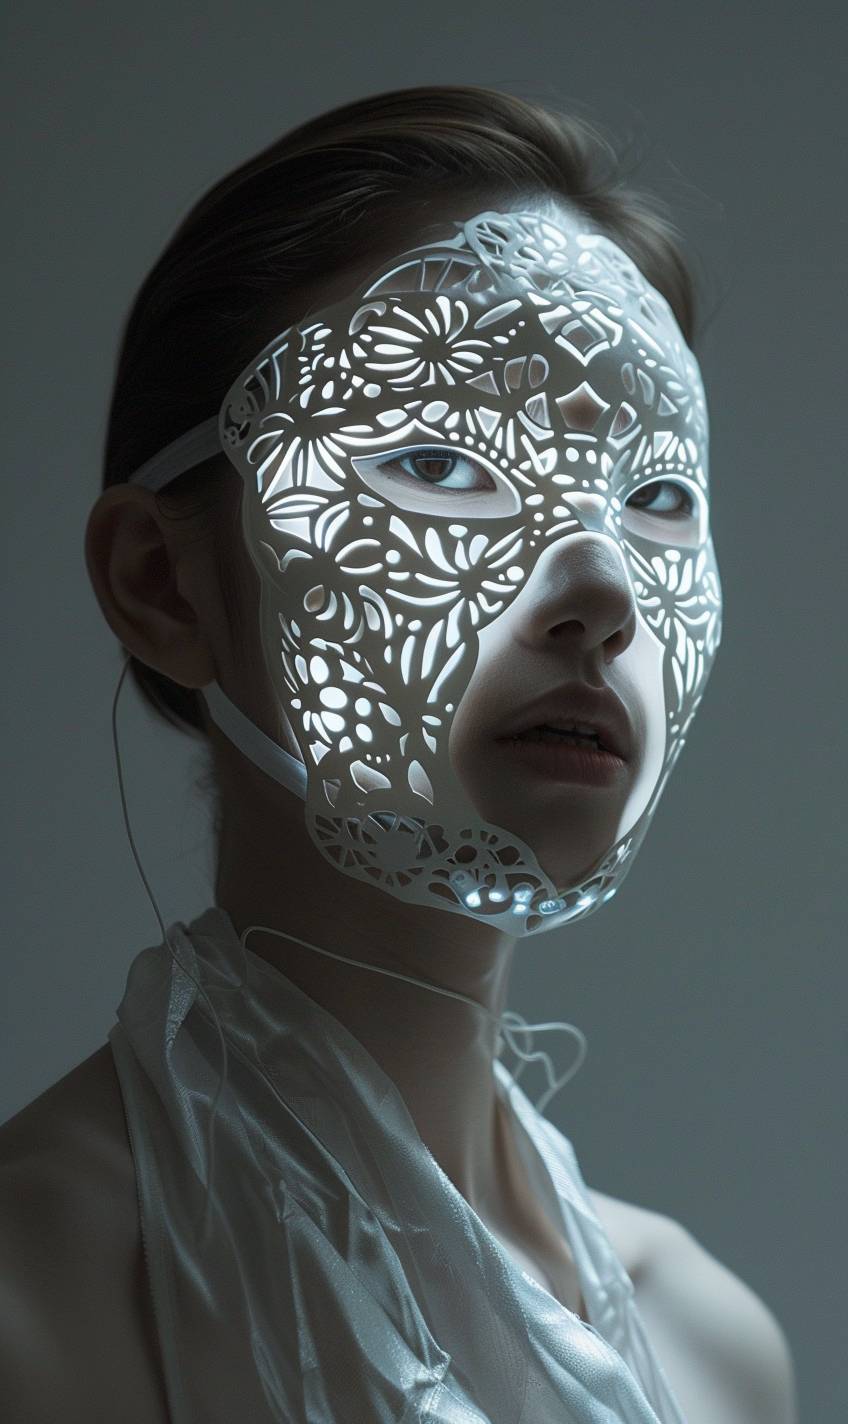 This mask decorates the real world with its delicate, laser-cut patterns that create a mesmerizing play of light and shadows. LED lights pulse and change color in response to the wearer's movements, adding a dynamic and living quality to the mask. The mask is secured with transparent straps, ensuring a comfortable fit and maintaining its fluid, uninterrupted aesthetic. The model's face is only partially visible, with the mask's ethereal form contouring like a second skin. The overall effect is a striking blend of technology and nature, evoking a sense of the futuristic and organic.